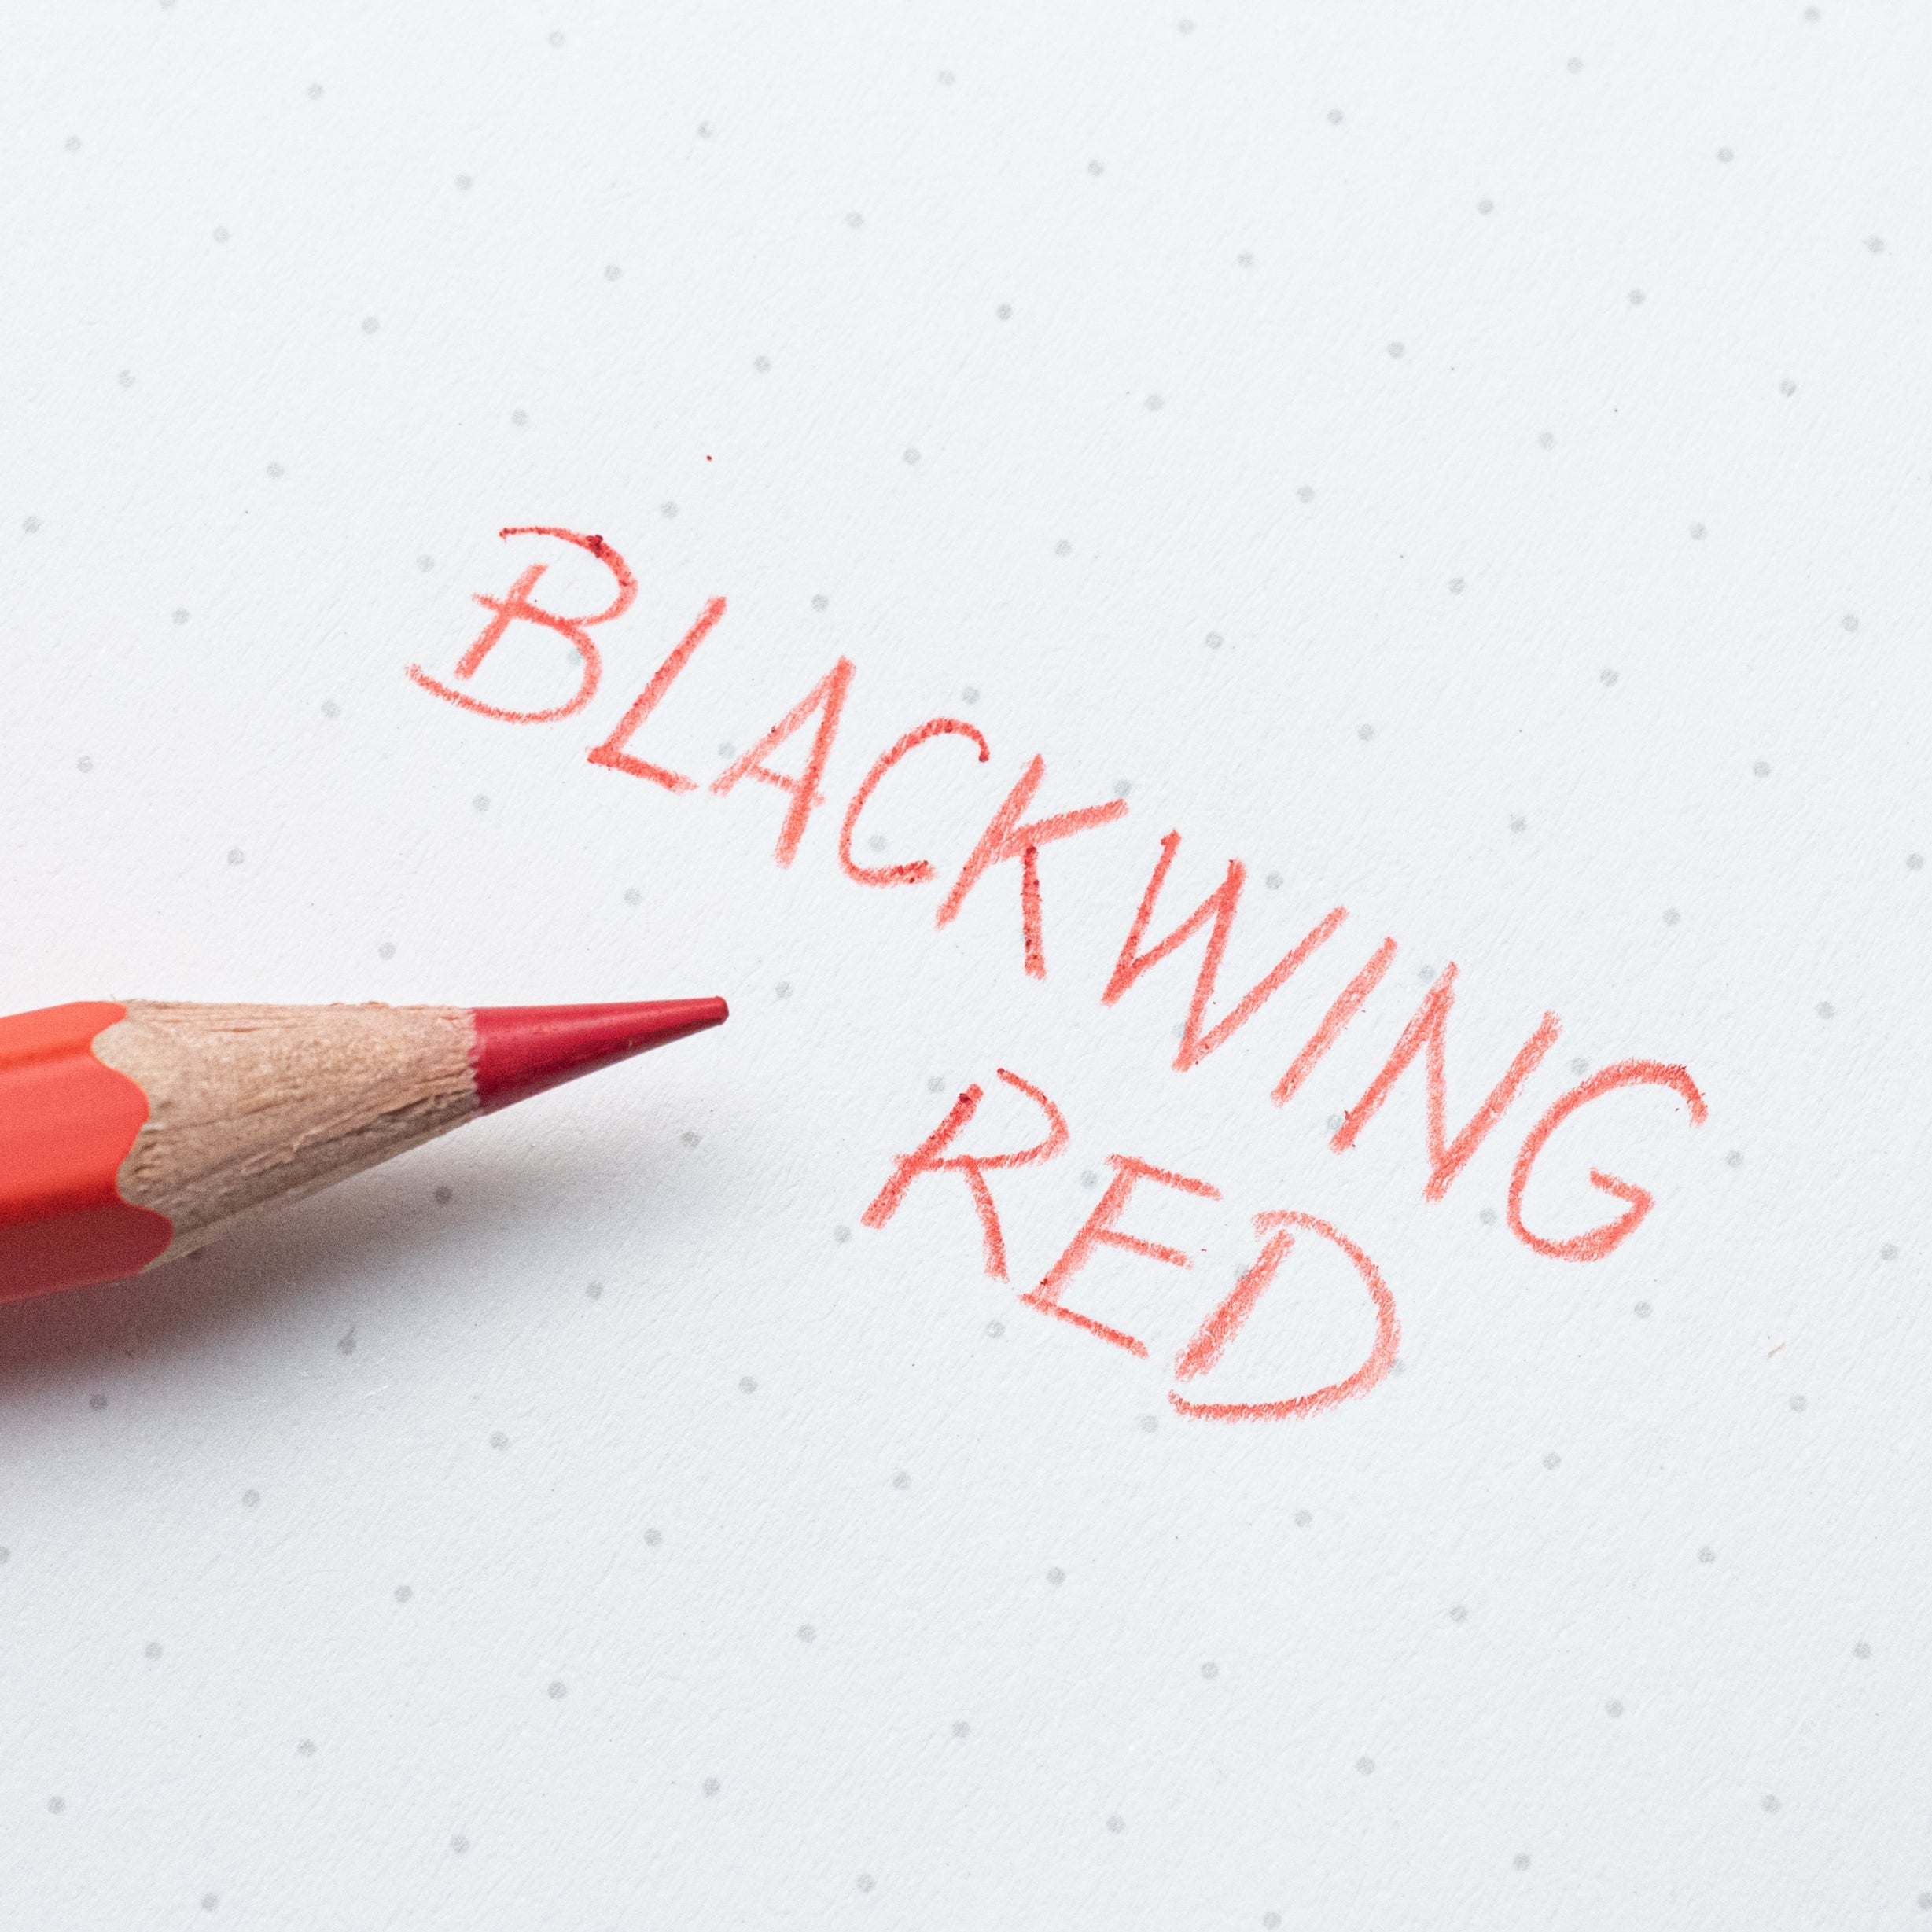 A red pencil with the Blackwing Red (Set of 4) written on it, perfect for sketching or editing.